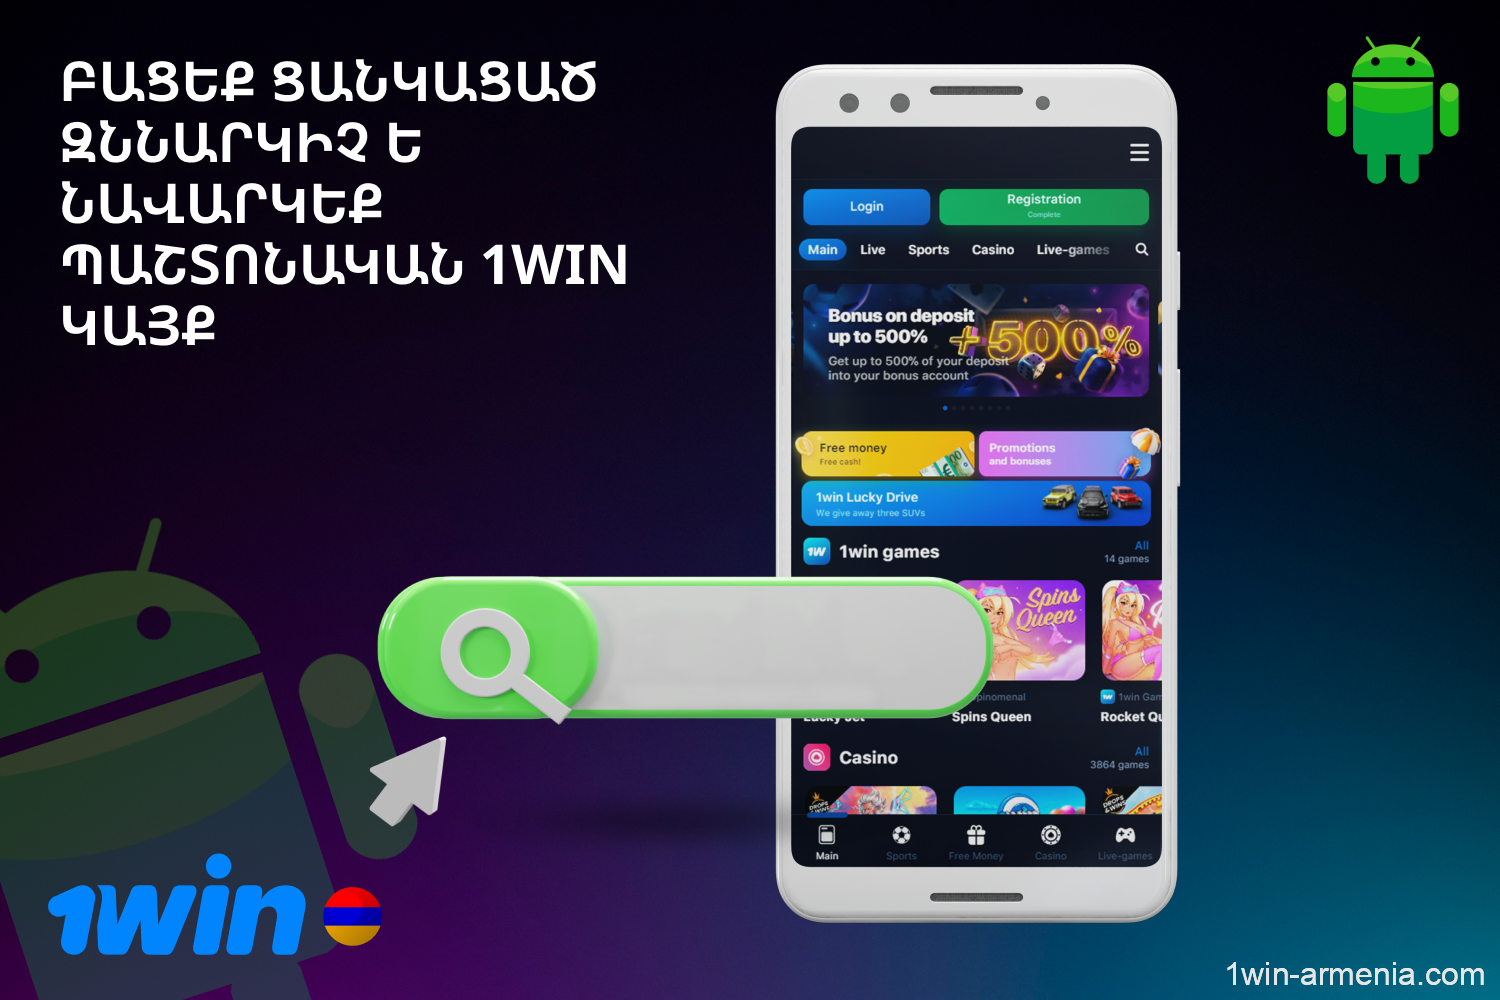 To download 1win APK, users from Armenia should visit the casino's official website